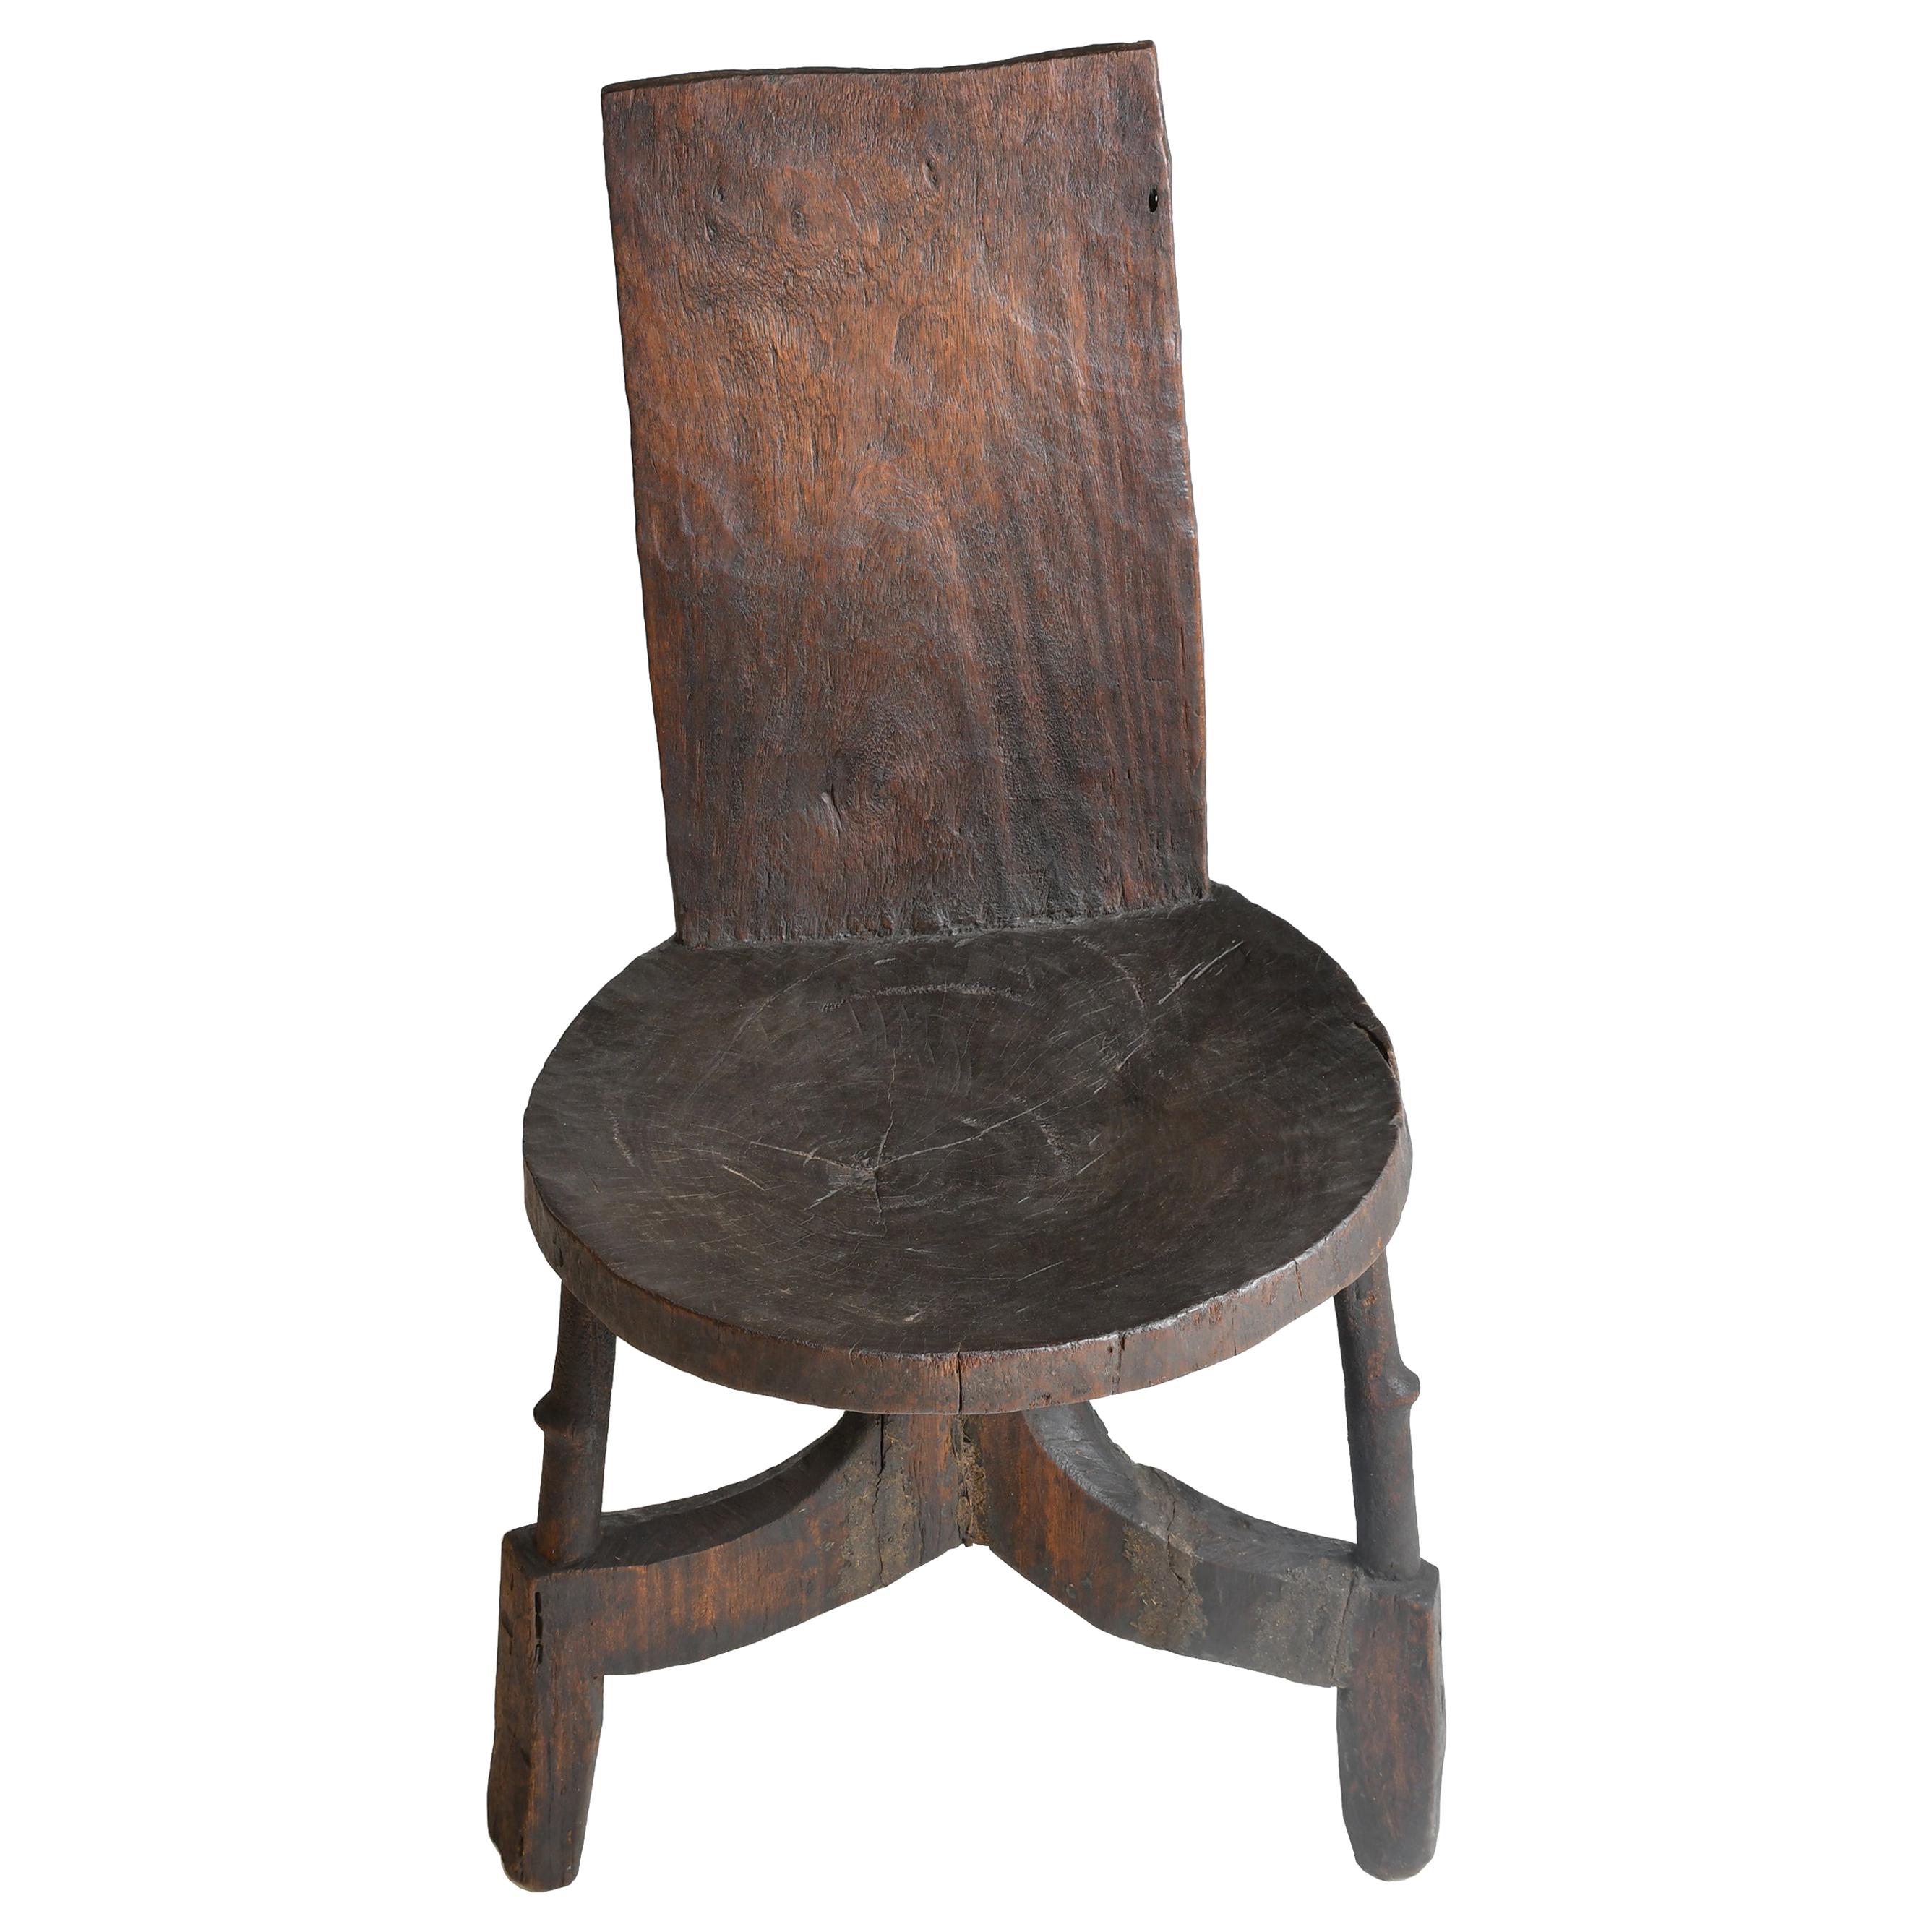 African Chieftain Chair from Oromo People in Ethiopia, circa Early 1900s